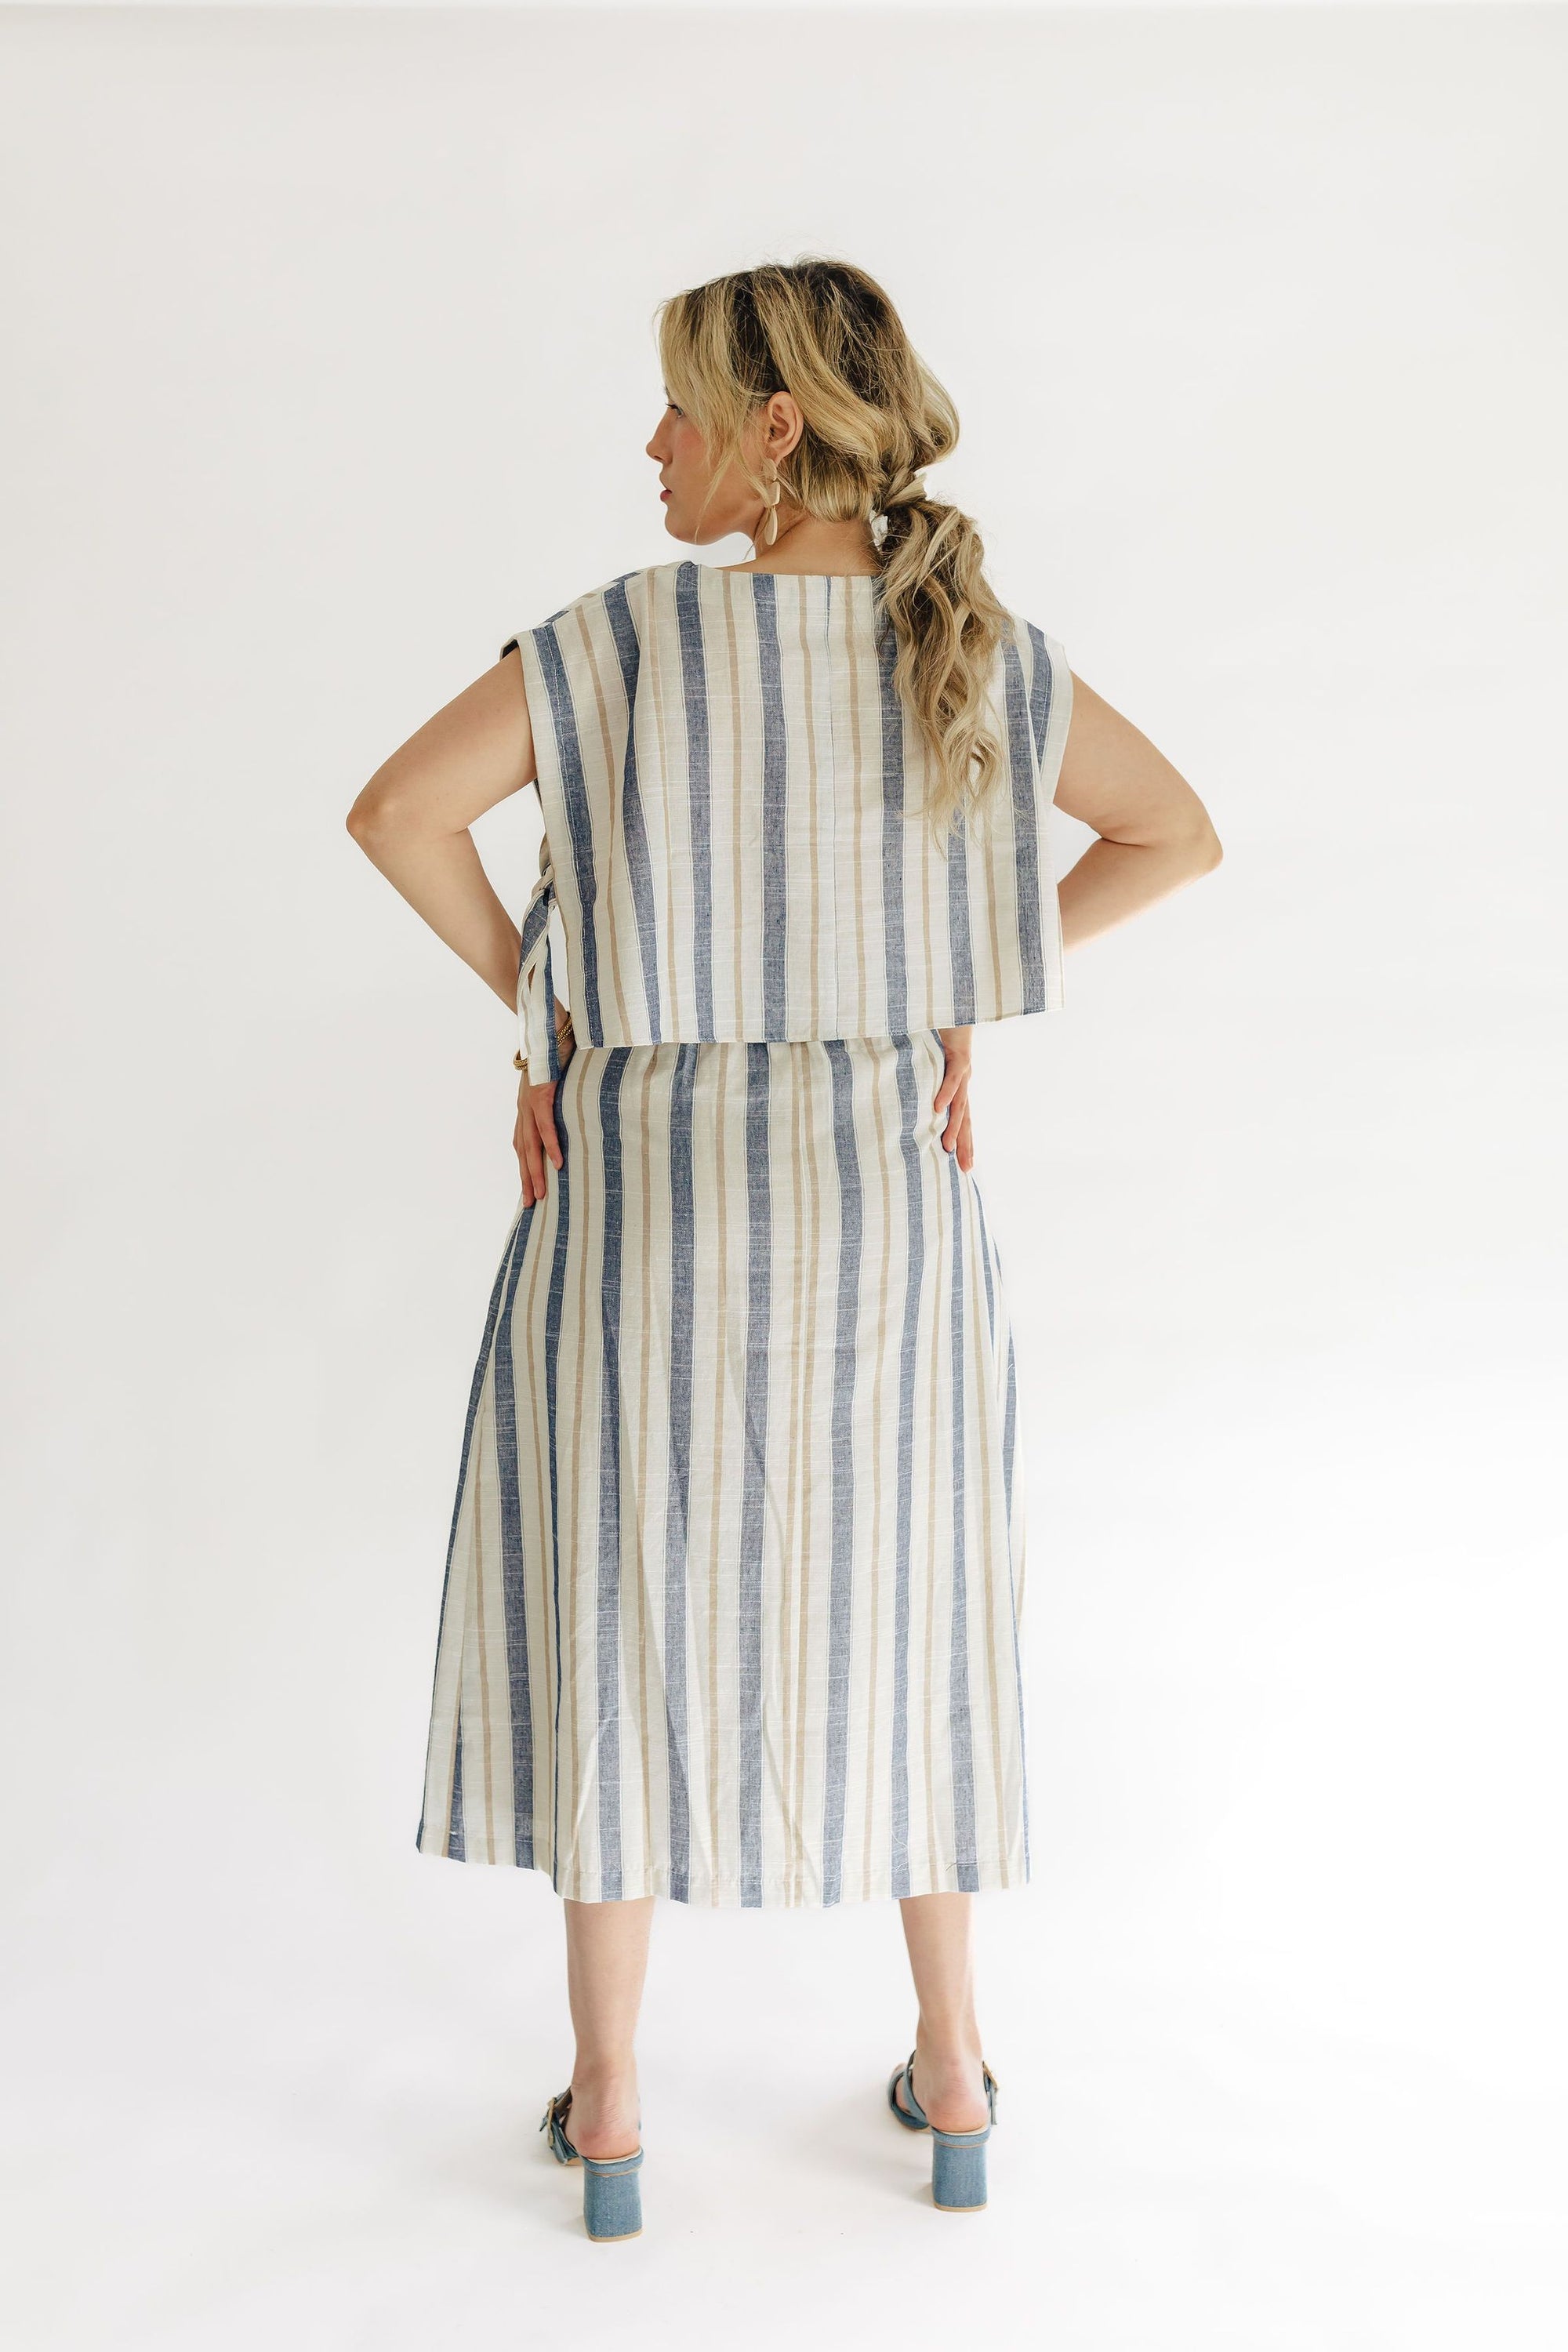 The Cammy Stripe Top + Skirt Set - Sold Separately